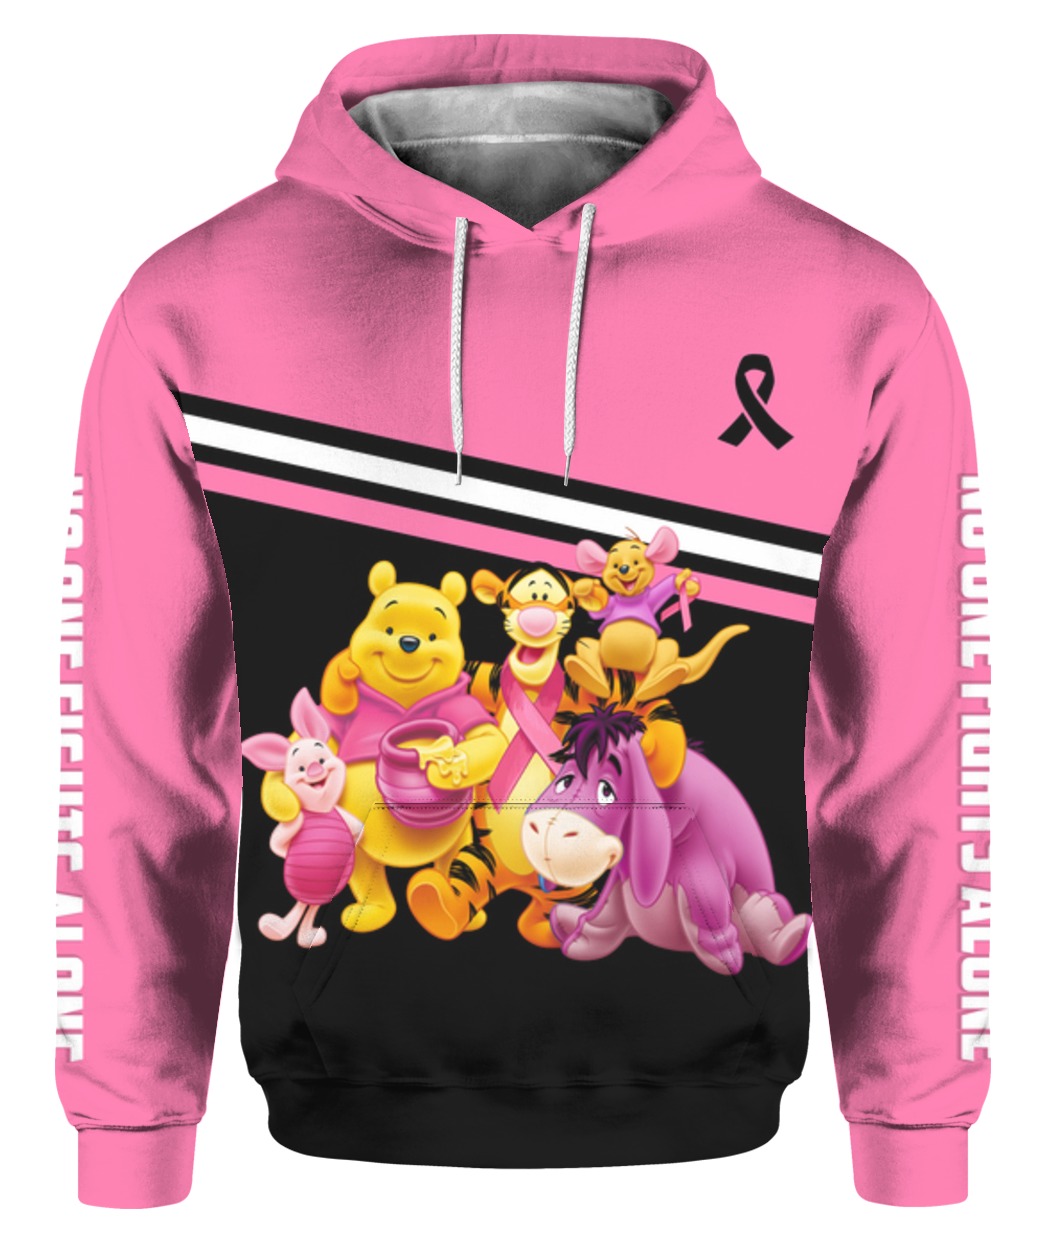 Winnie-the-pooh breast cancer awareness all over printed hoodie - front